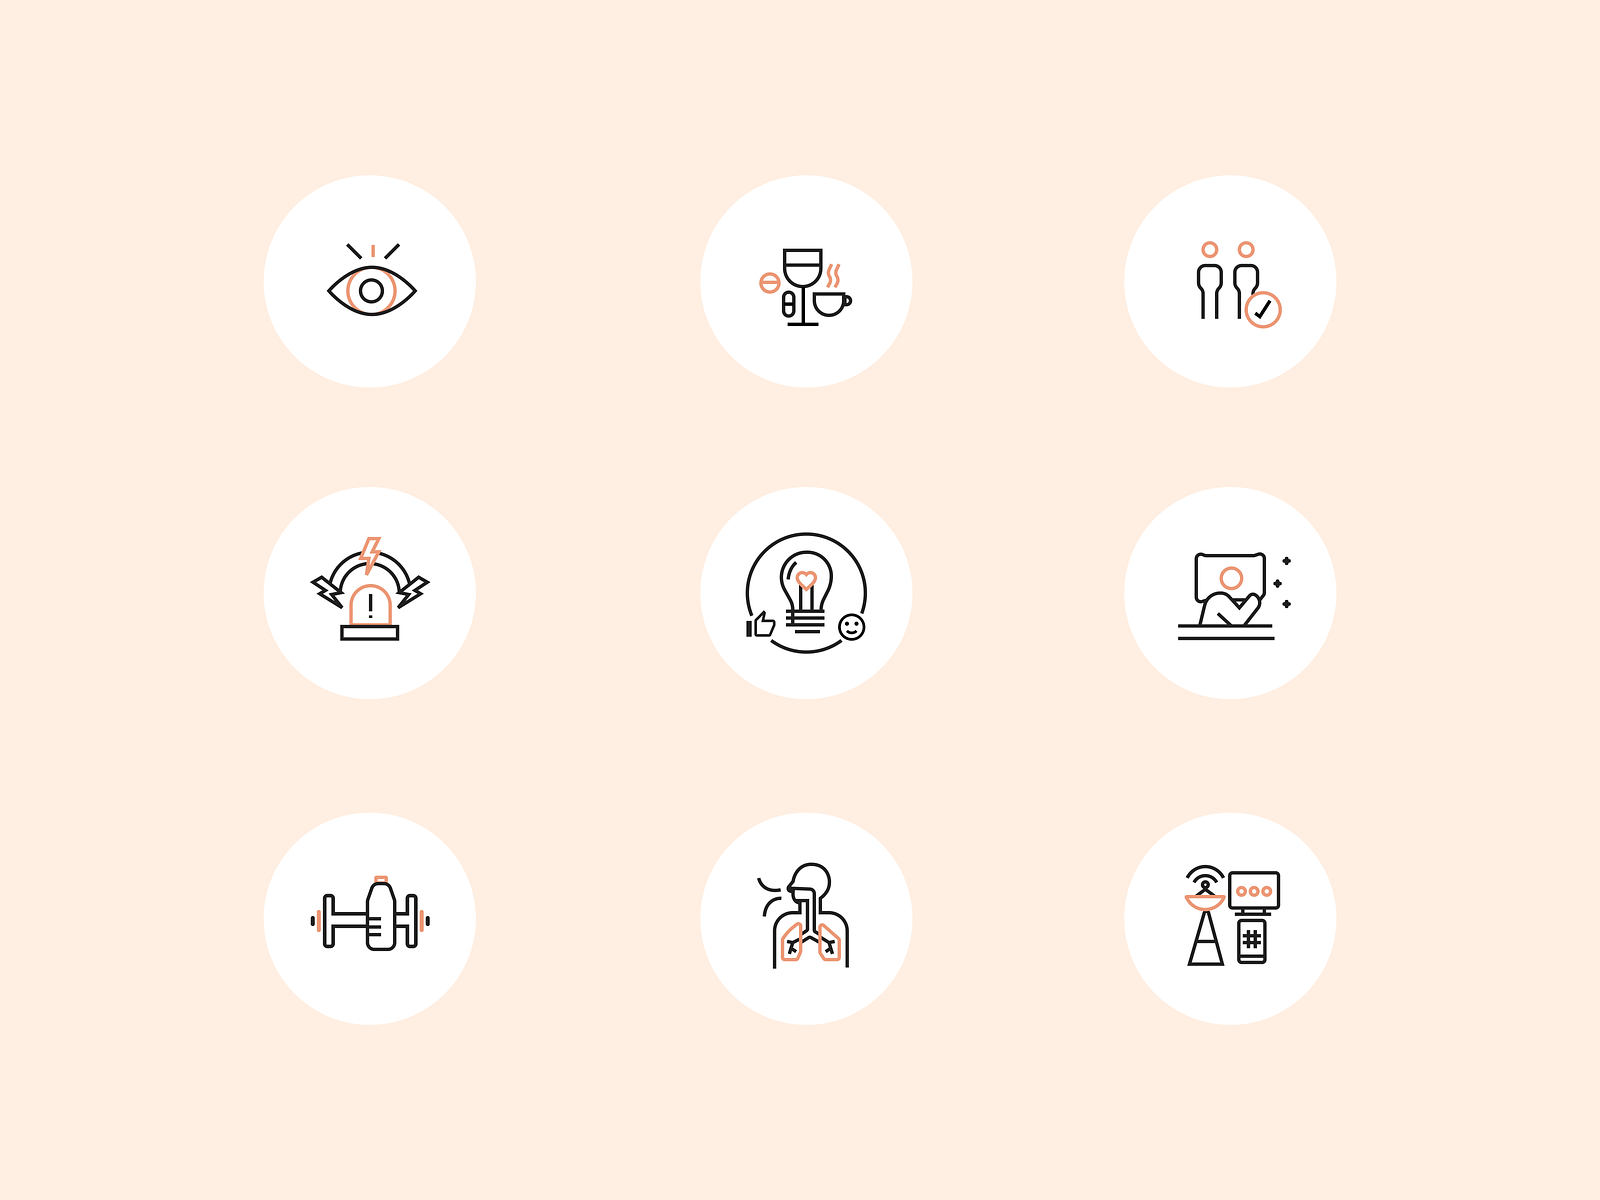 Health & Wellness icon set by Camille Pilon on Dribbble